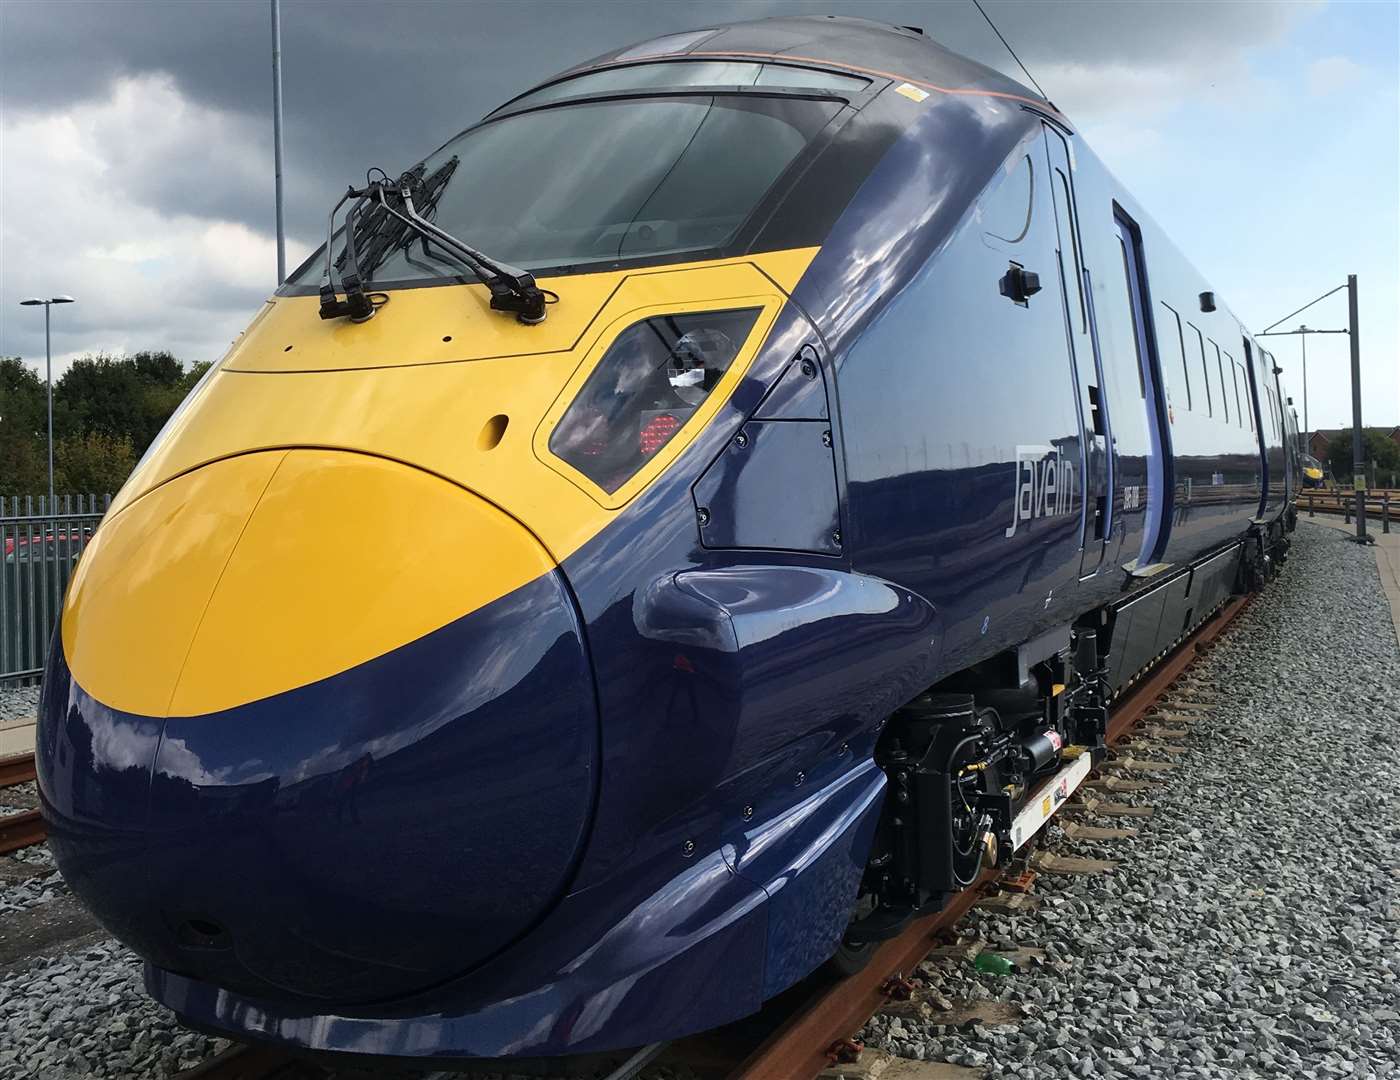 High speed train is now back in service